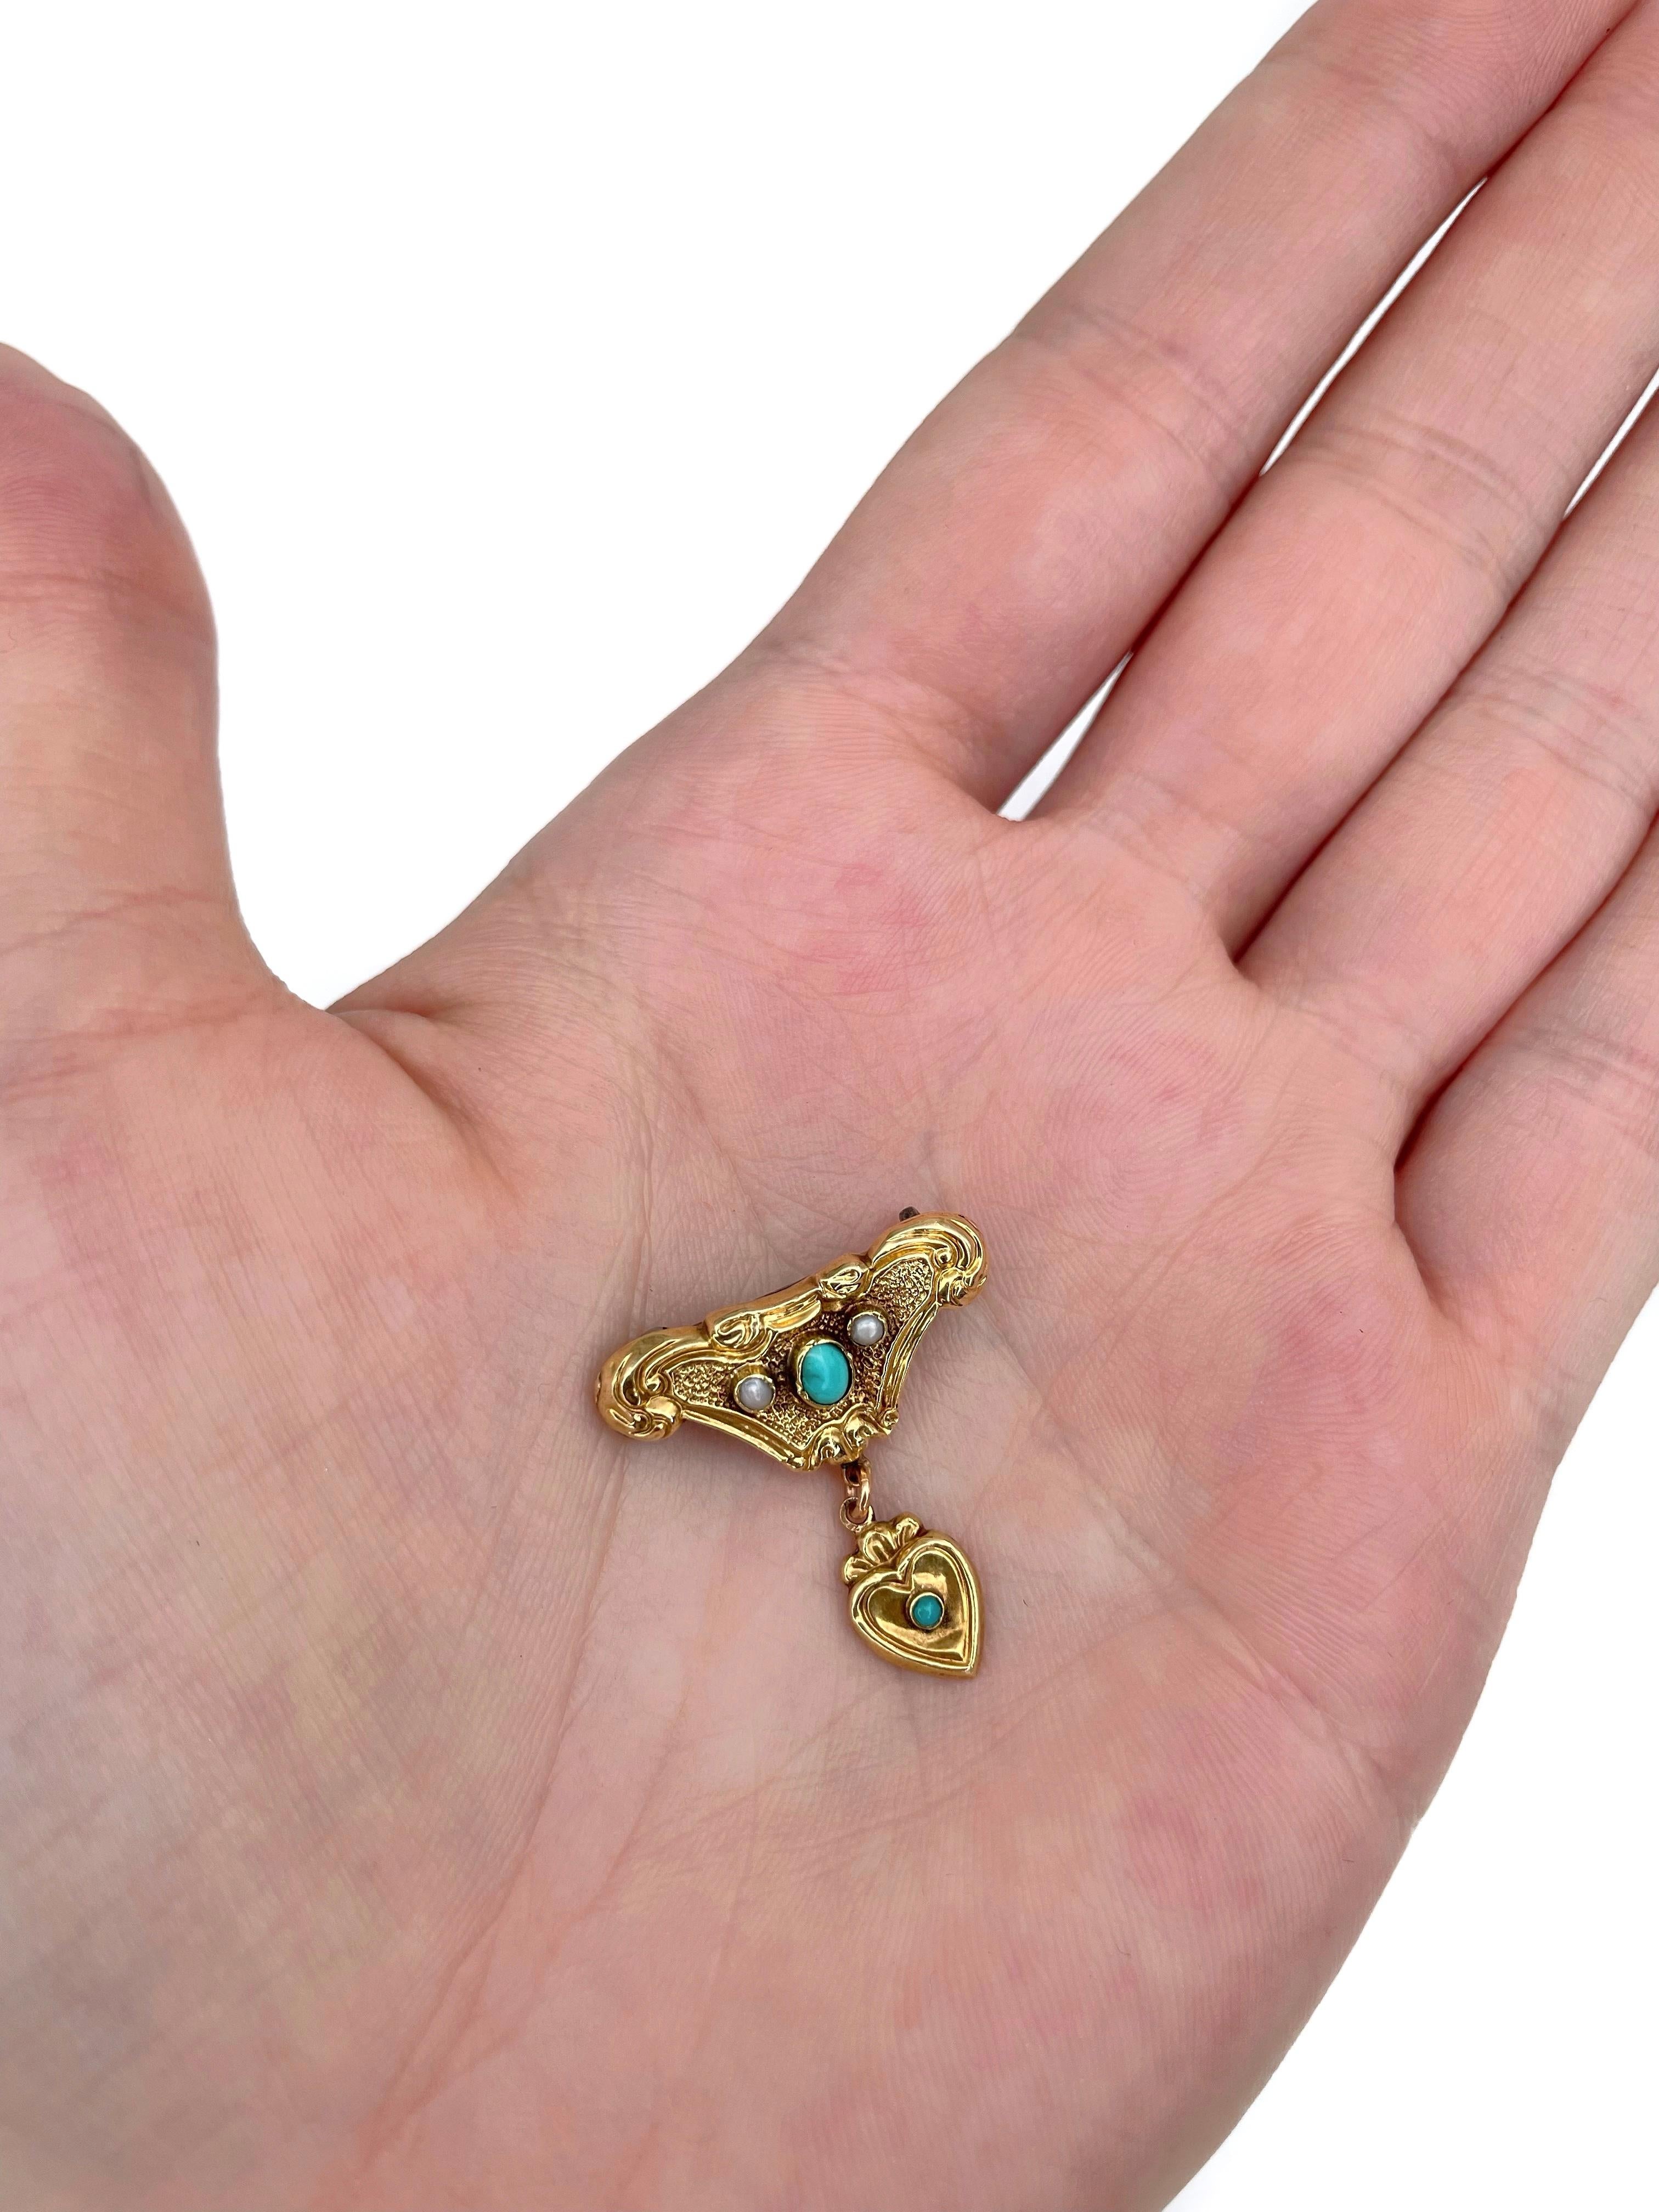 This is a lovely Victorian miniature drop pin brooch crafted in 14K yellow gold. The piece features cabochon cut turquoises and seed pearls. 

Has a C clasp. 

Weight: 1.64g
Size: 2.5x2.2cm

———

If you have any questions, please feel free to ask.